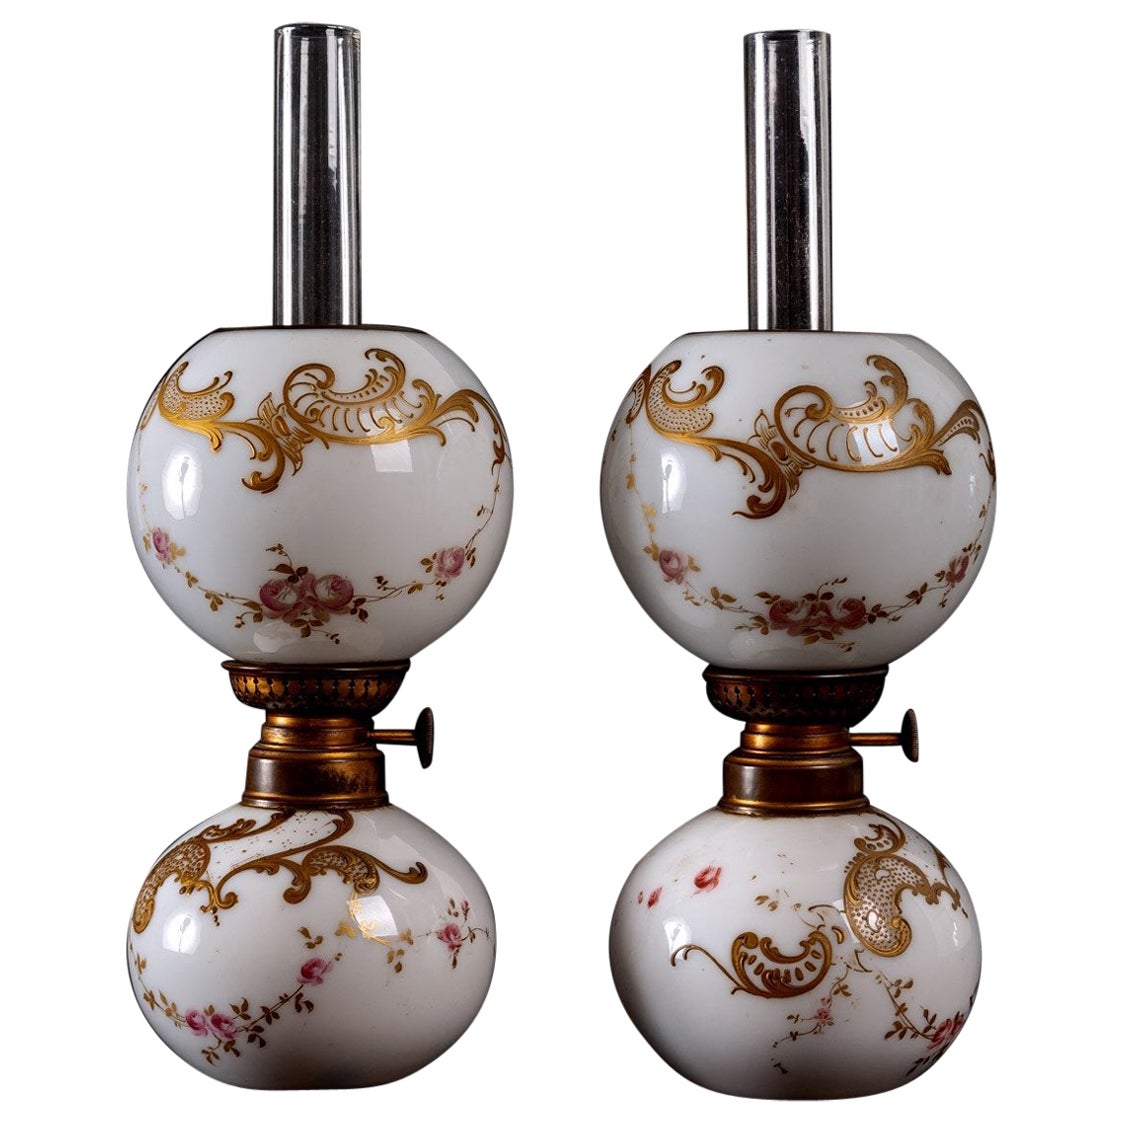 Pair of Quinquet, White Opaline, Maison Baccarat, Period: Early 19th Century For Sale